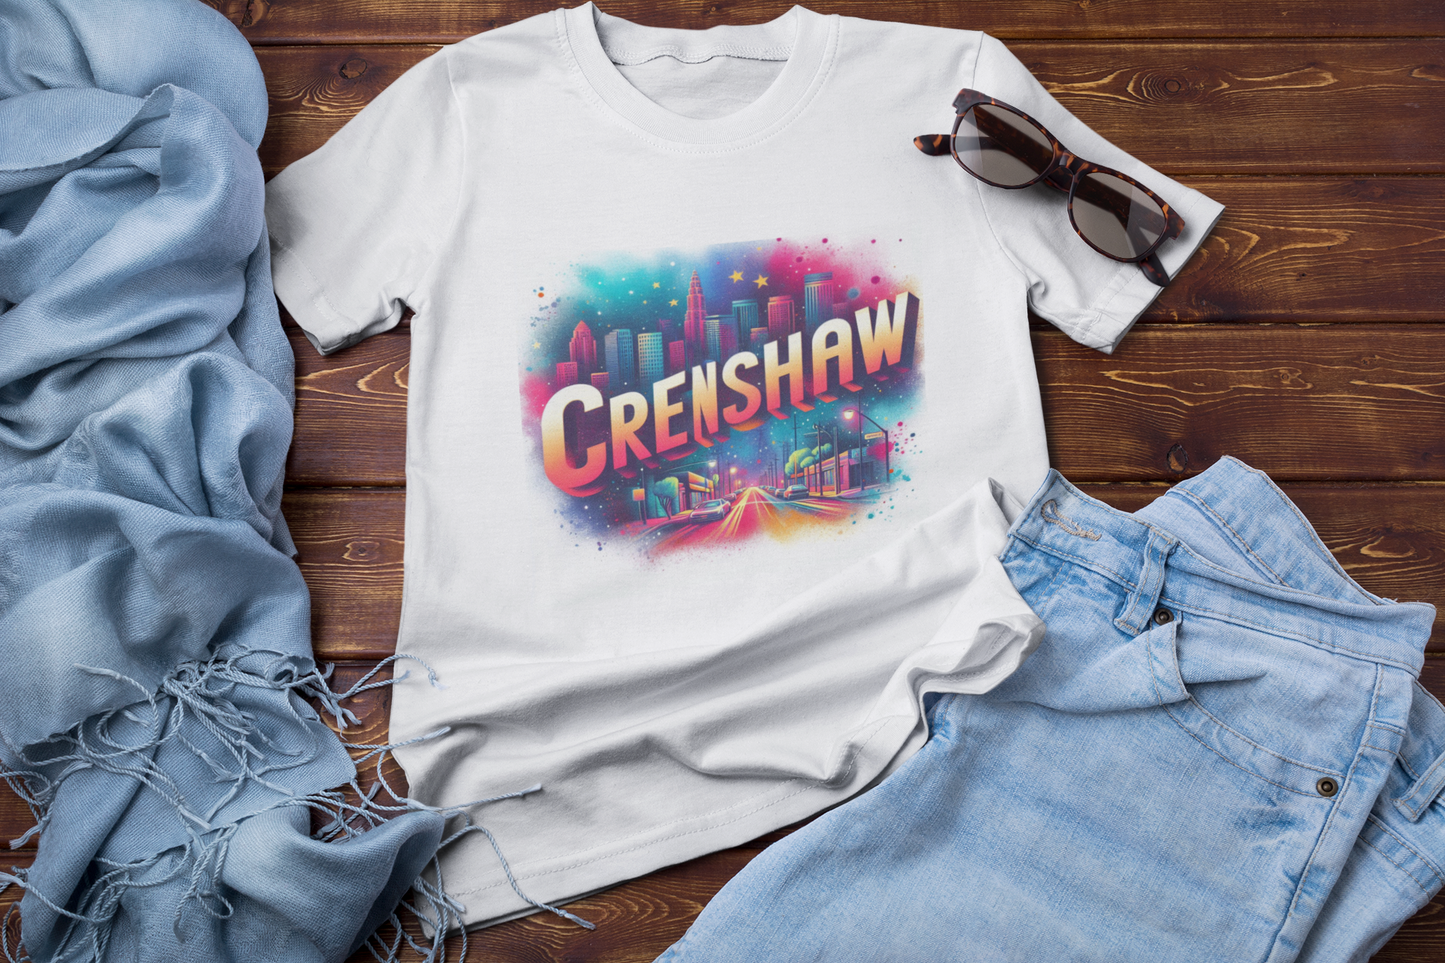 CRENSHAW TWO WHITE T-SHIRT, Back in the Day, African American, Black History, Black Neighborhood, Graphic T-shirt, Urban Streetwear Unisex Jersey Short Sleeve Tee